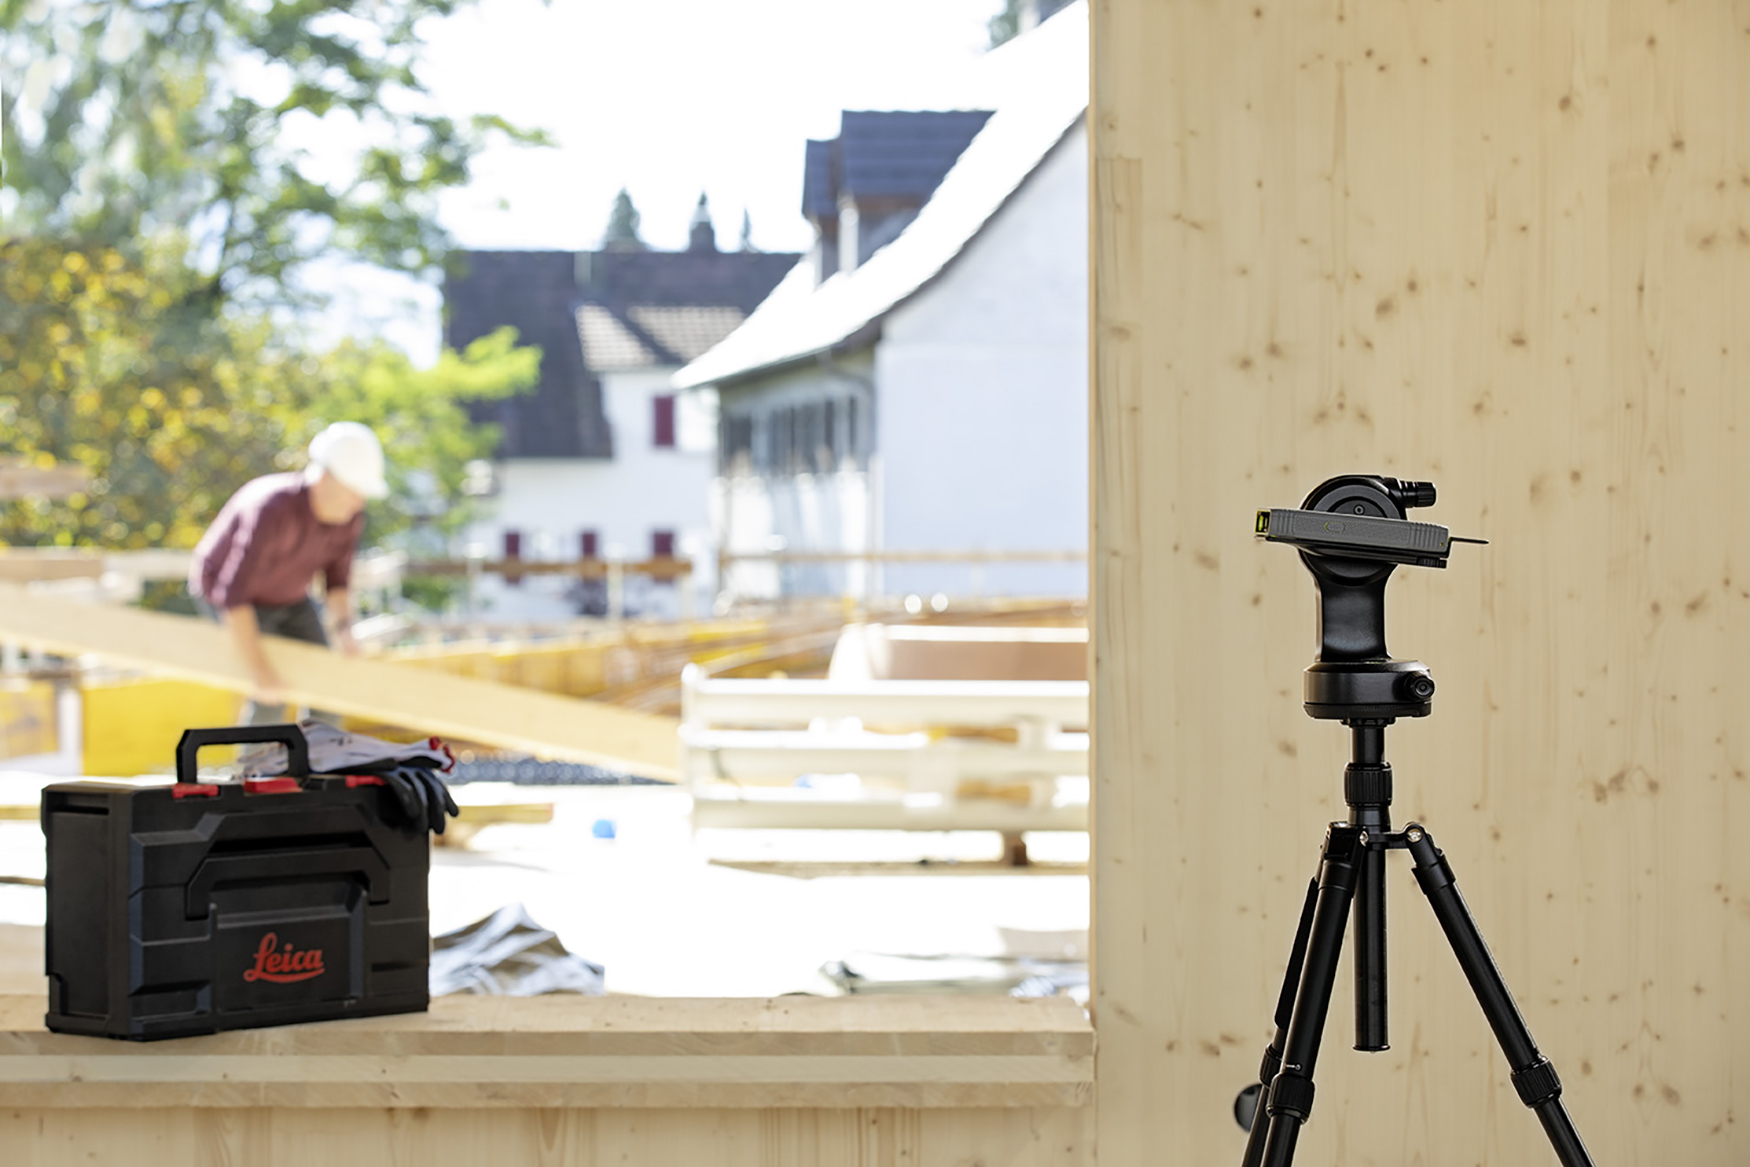 Leica DISTO X6 laser measure on the DST 360-X and the TRI 120 tripod